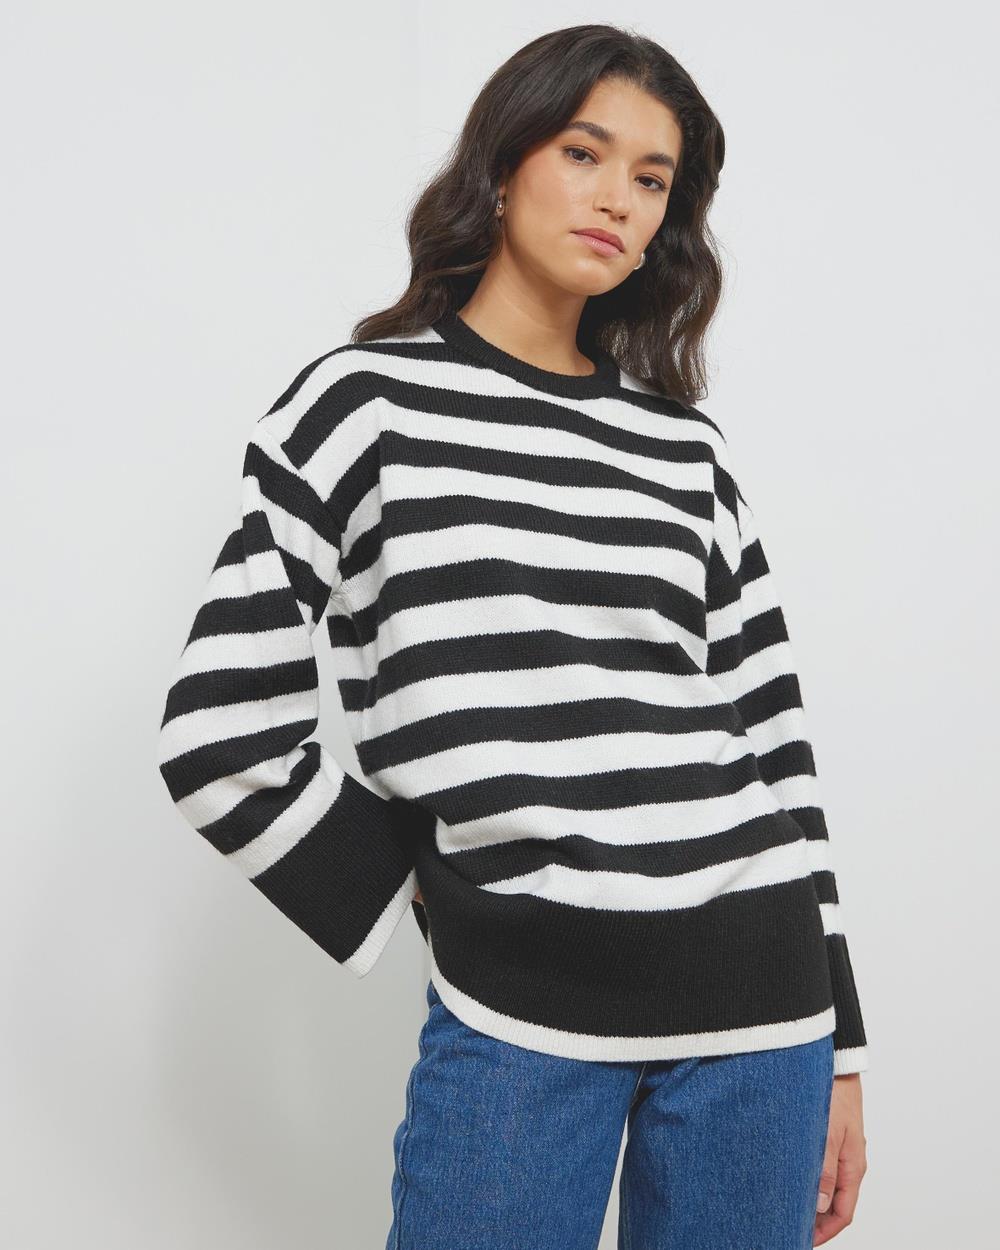 Atmos&Here - Madaline Long Line Stripe Knit Jumper - Jumpers & Cardigans (Black With Cream Stripe) Madaline Long Line Stripe Knit Jumper